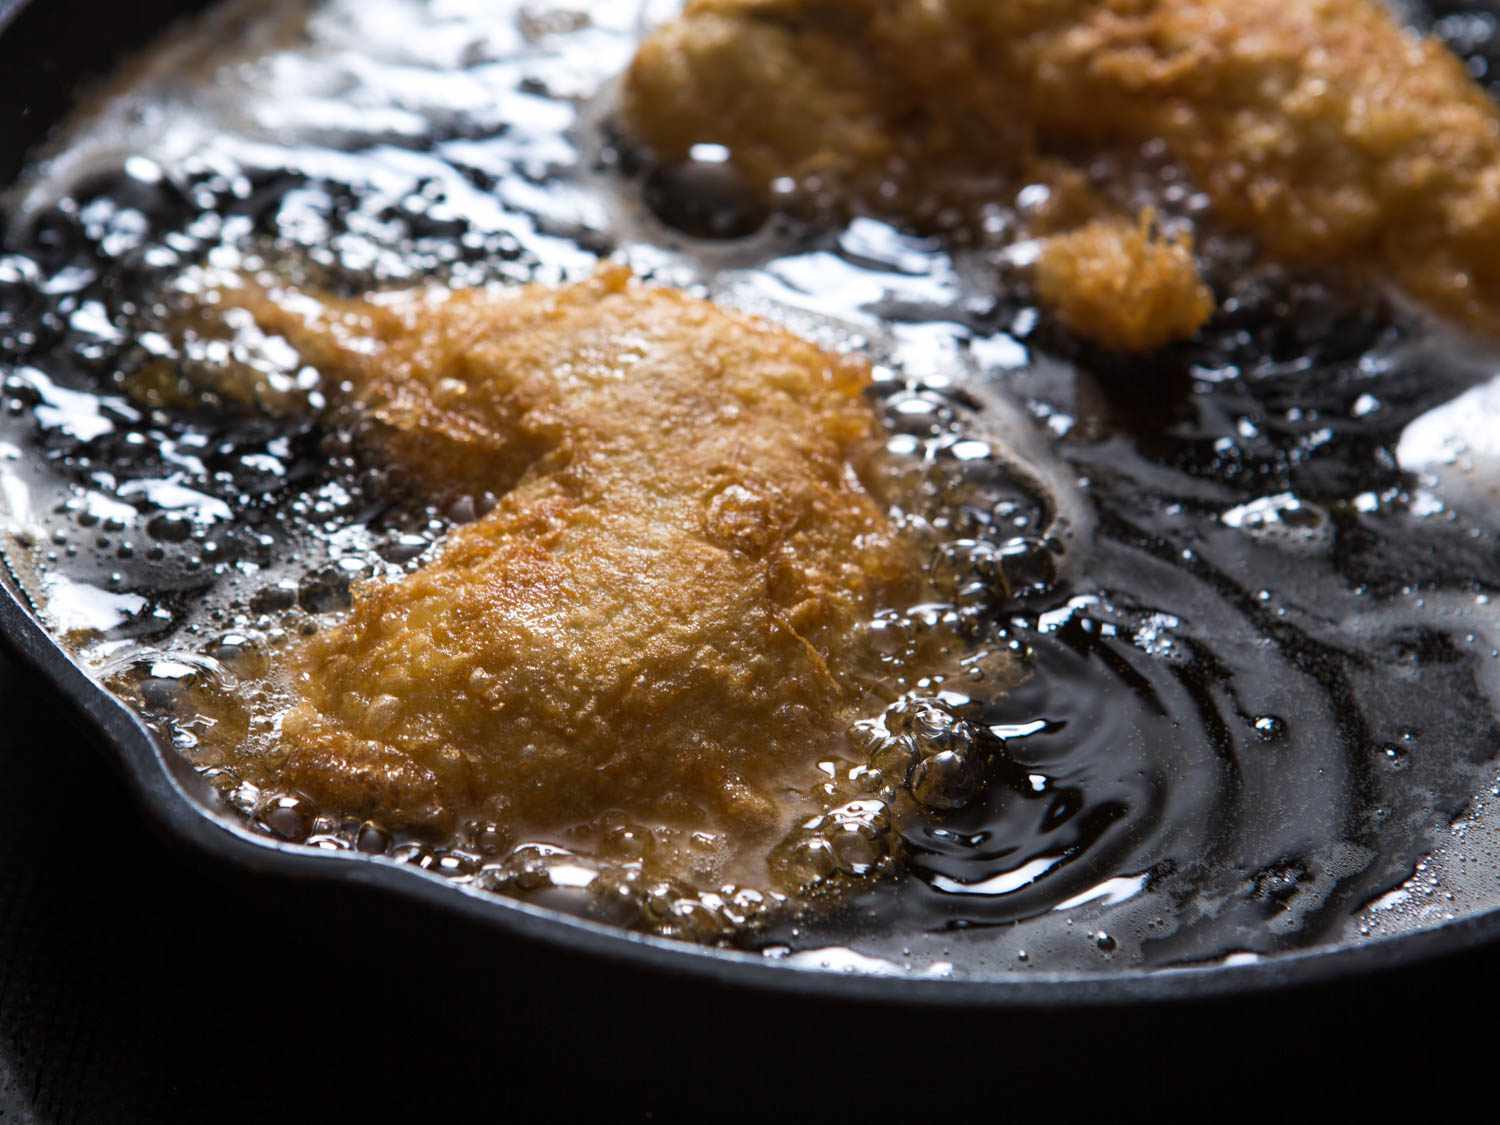 Chicken frying in oil in a cast-iron skillet